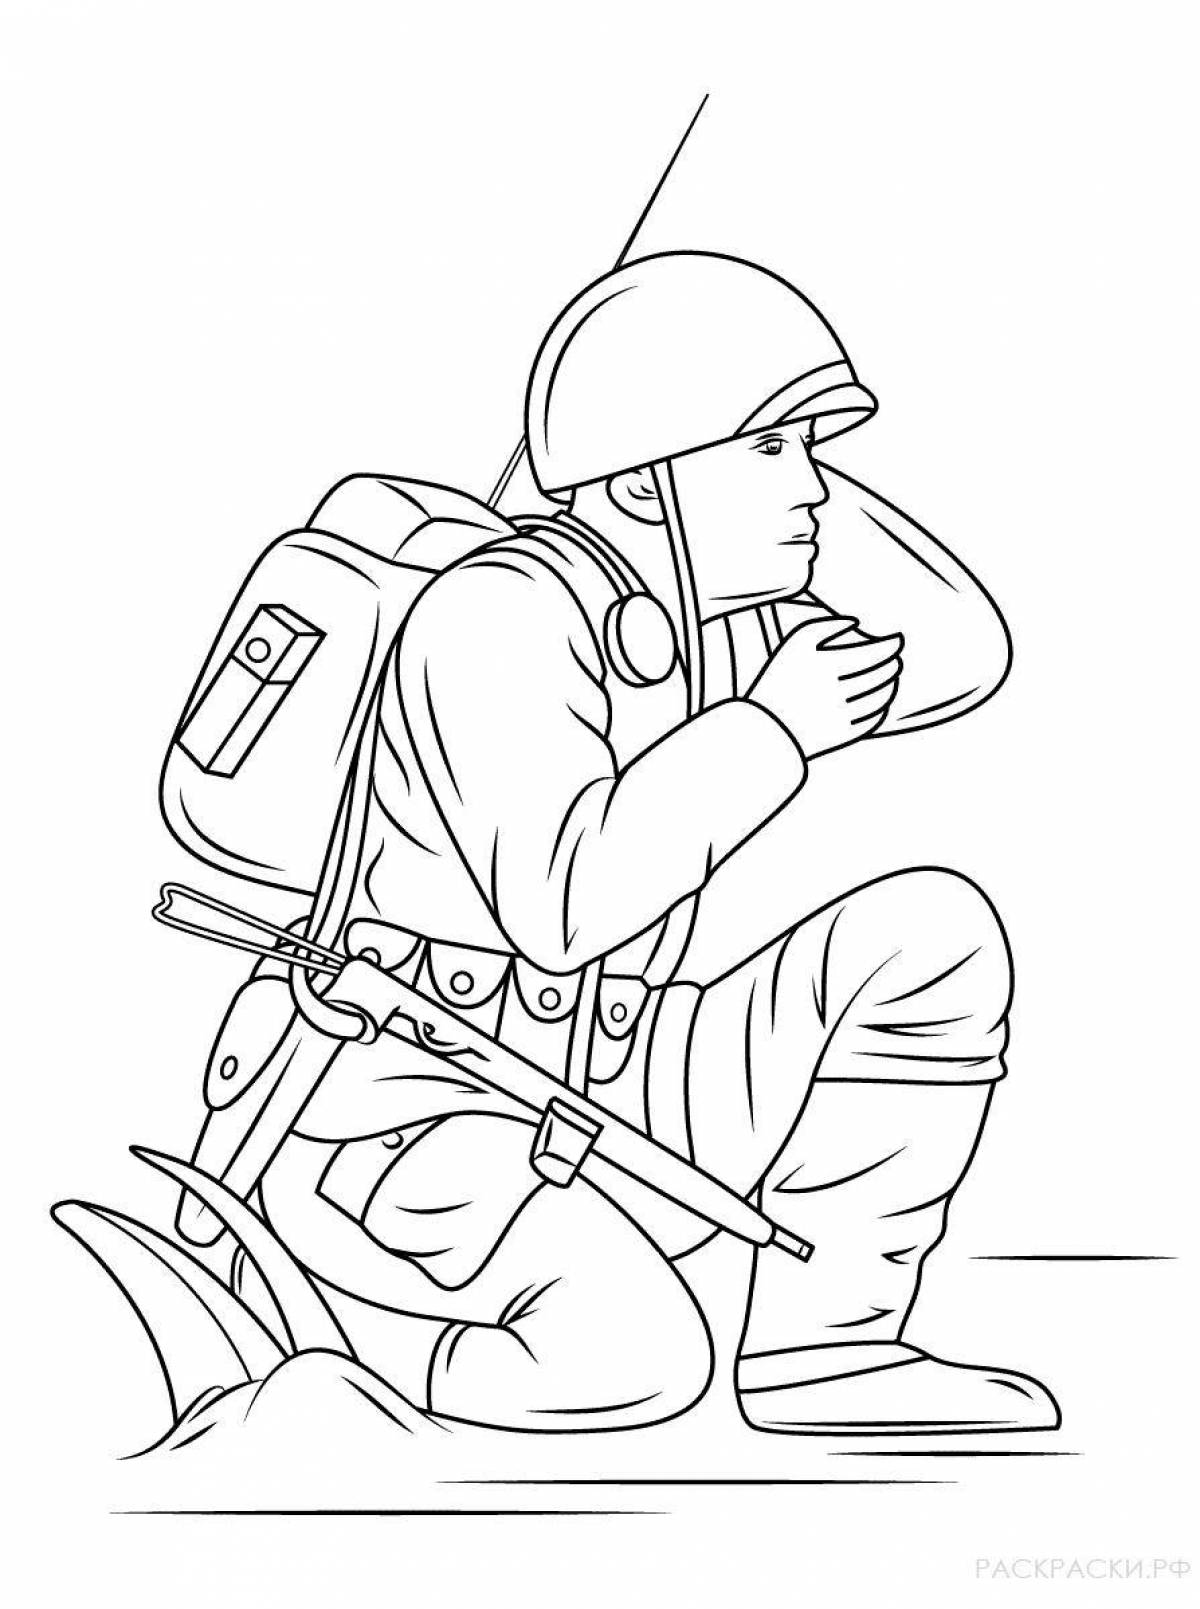 Great junior military profession coloring book